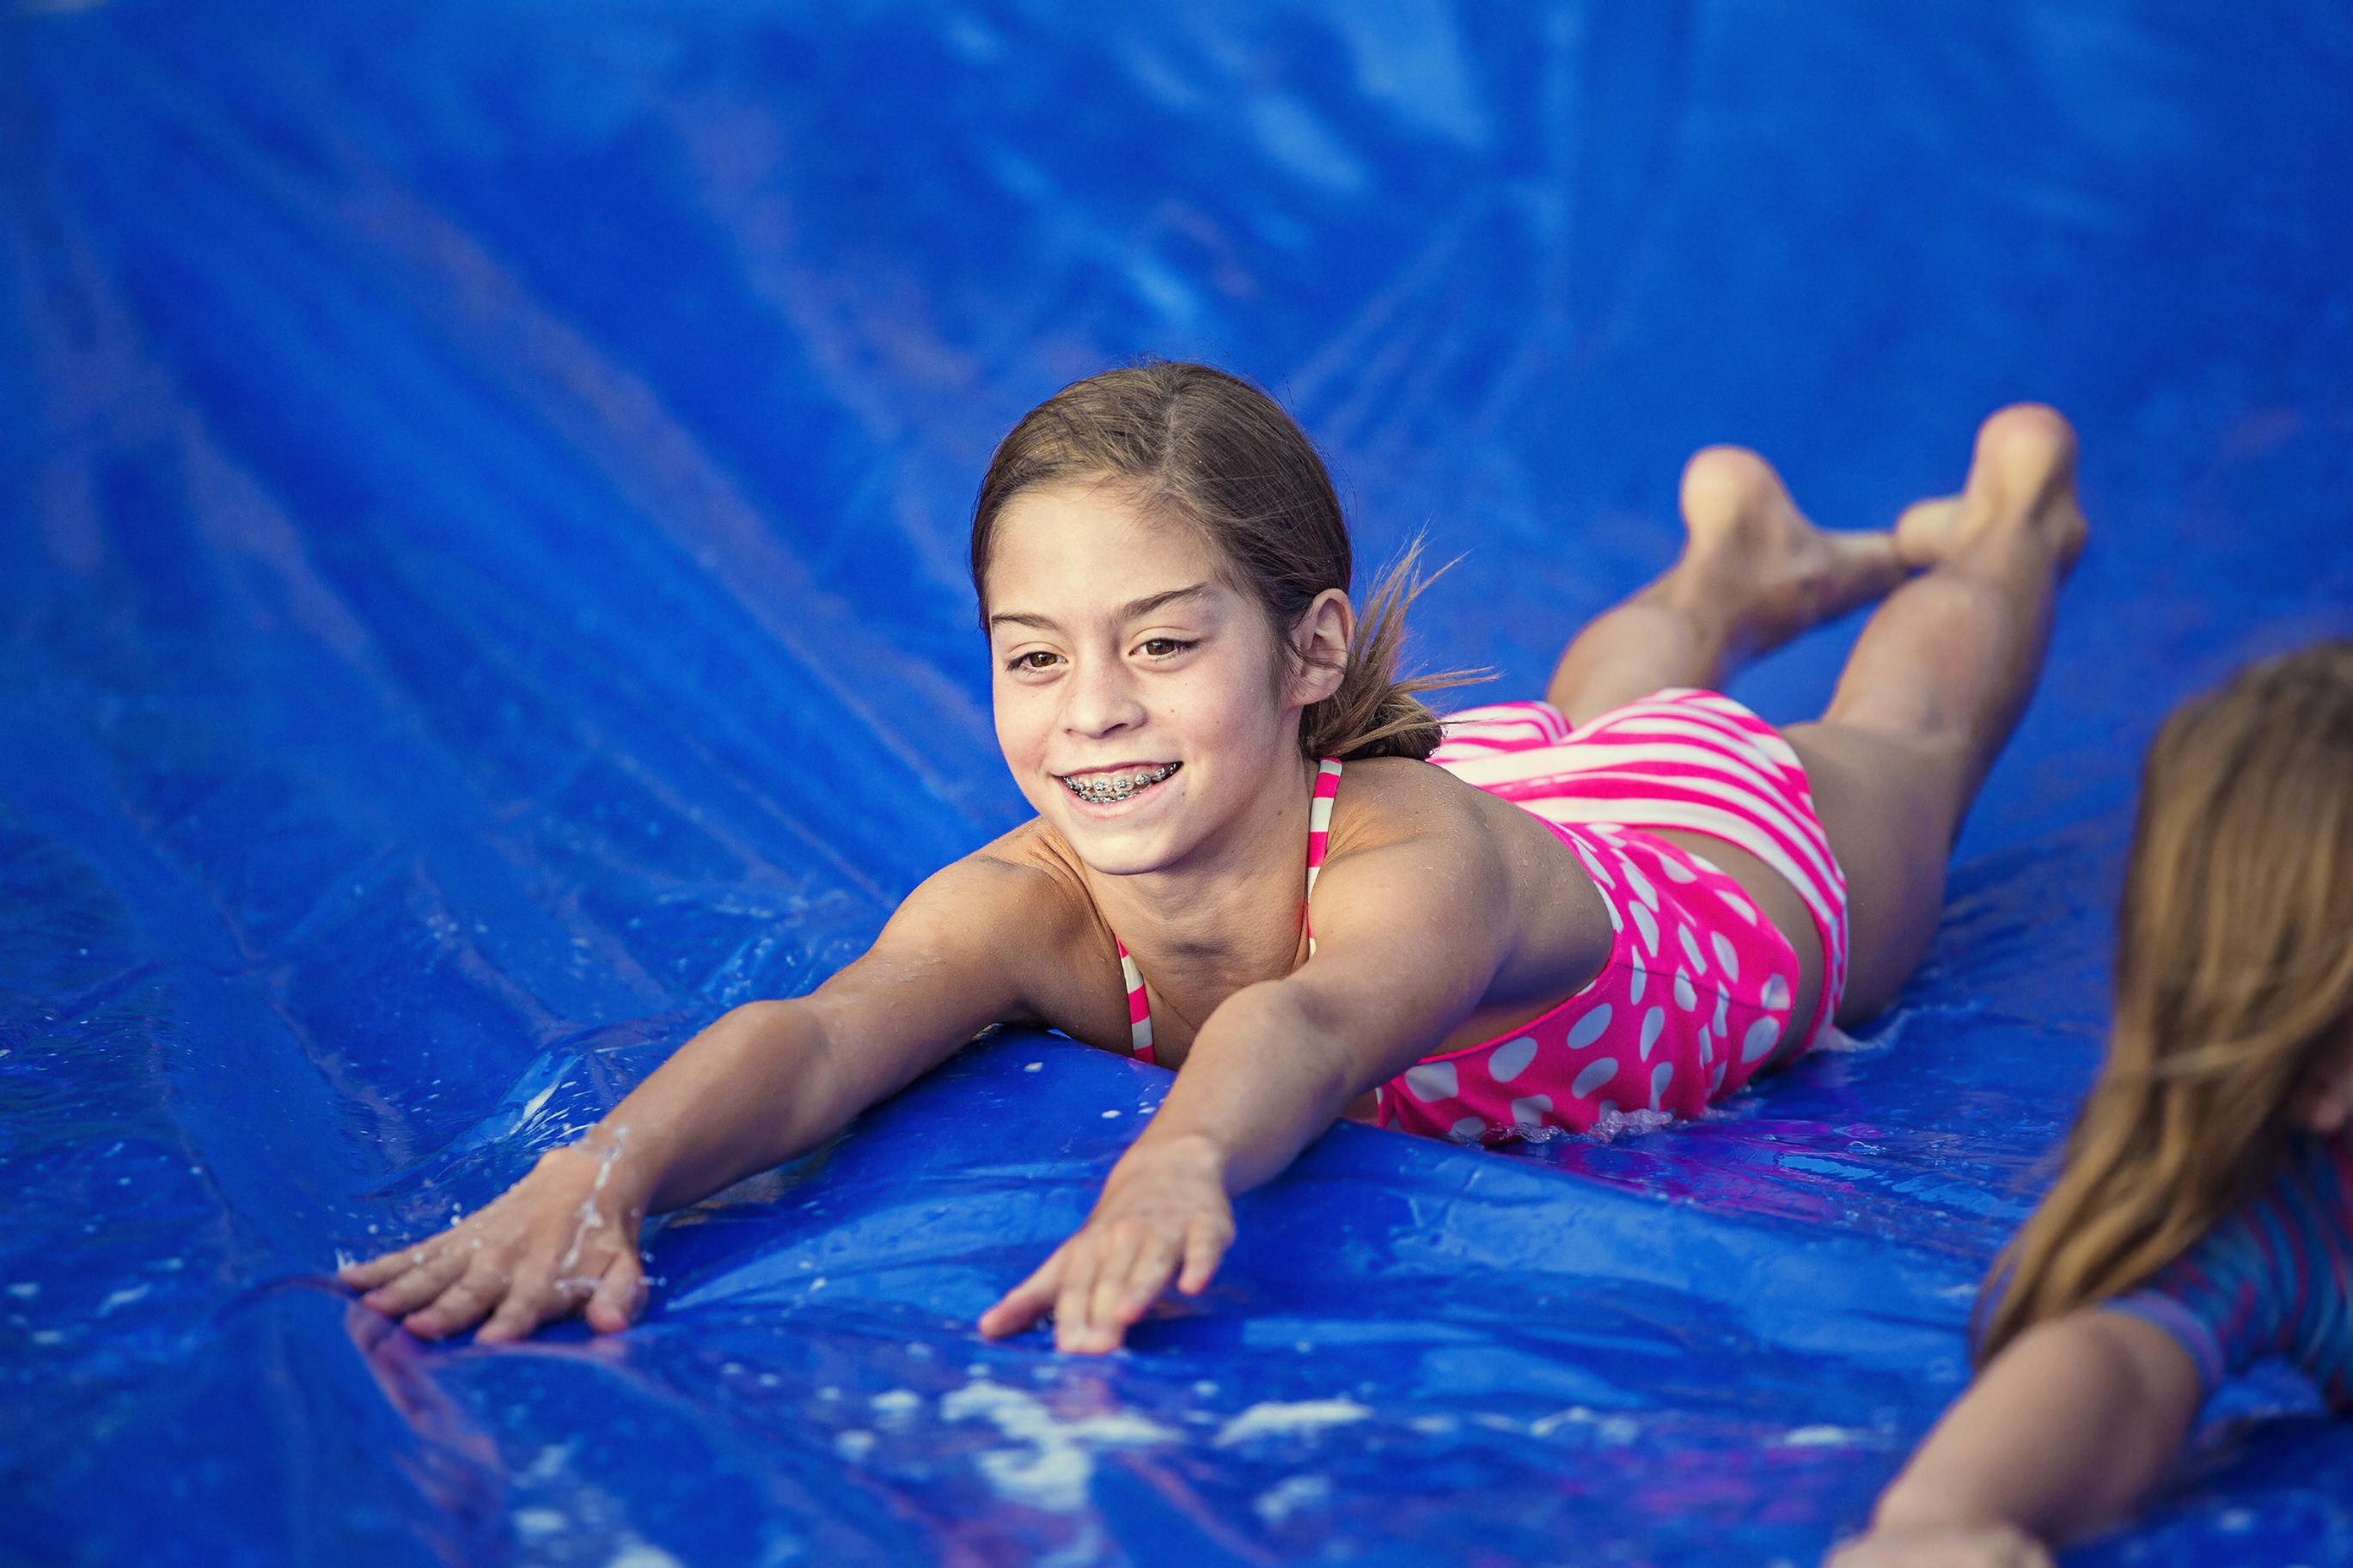 A girl in a bathing suit sliding down a blue tarp being used as a slip n slide